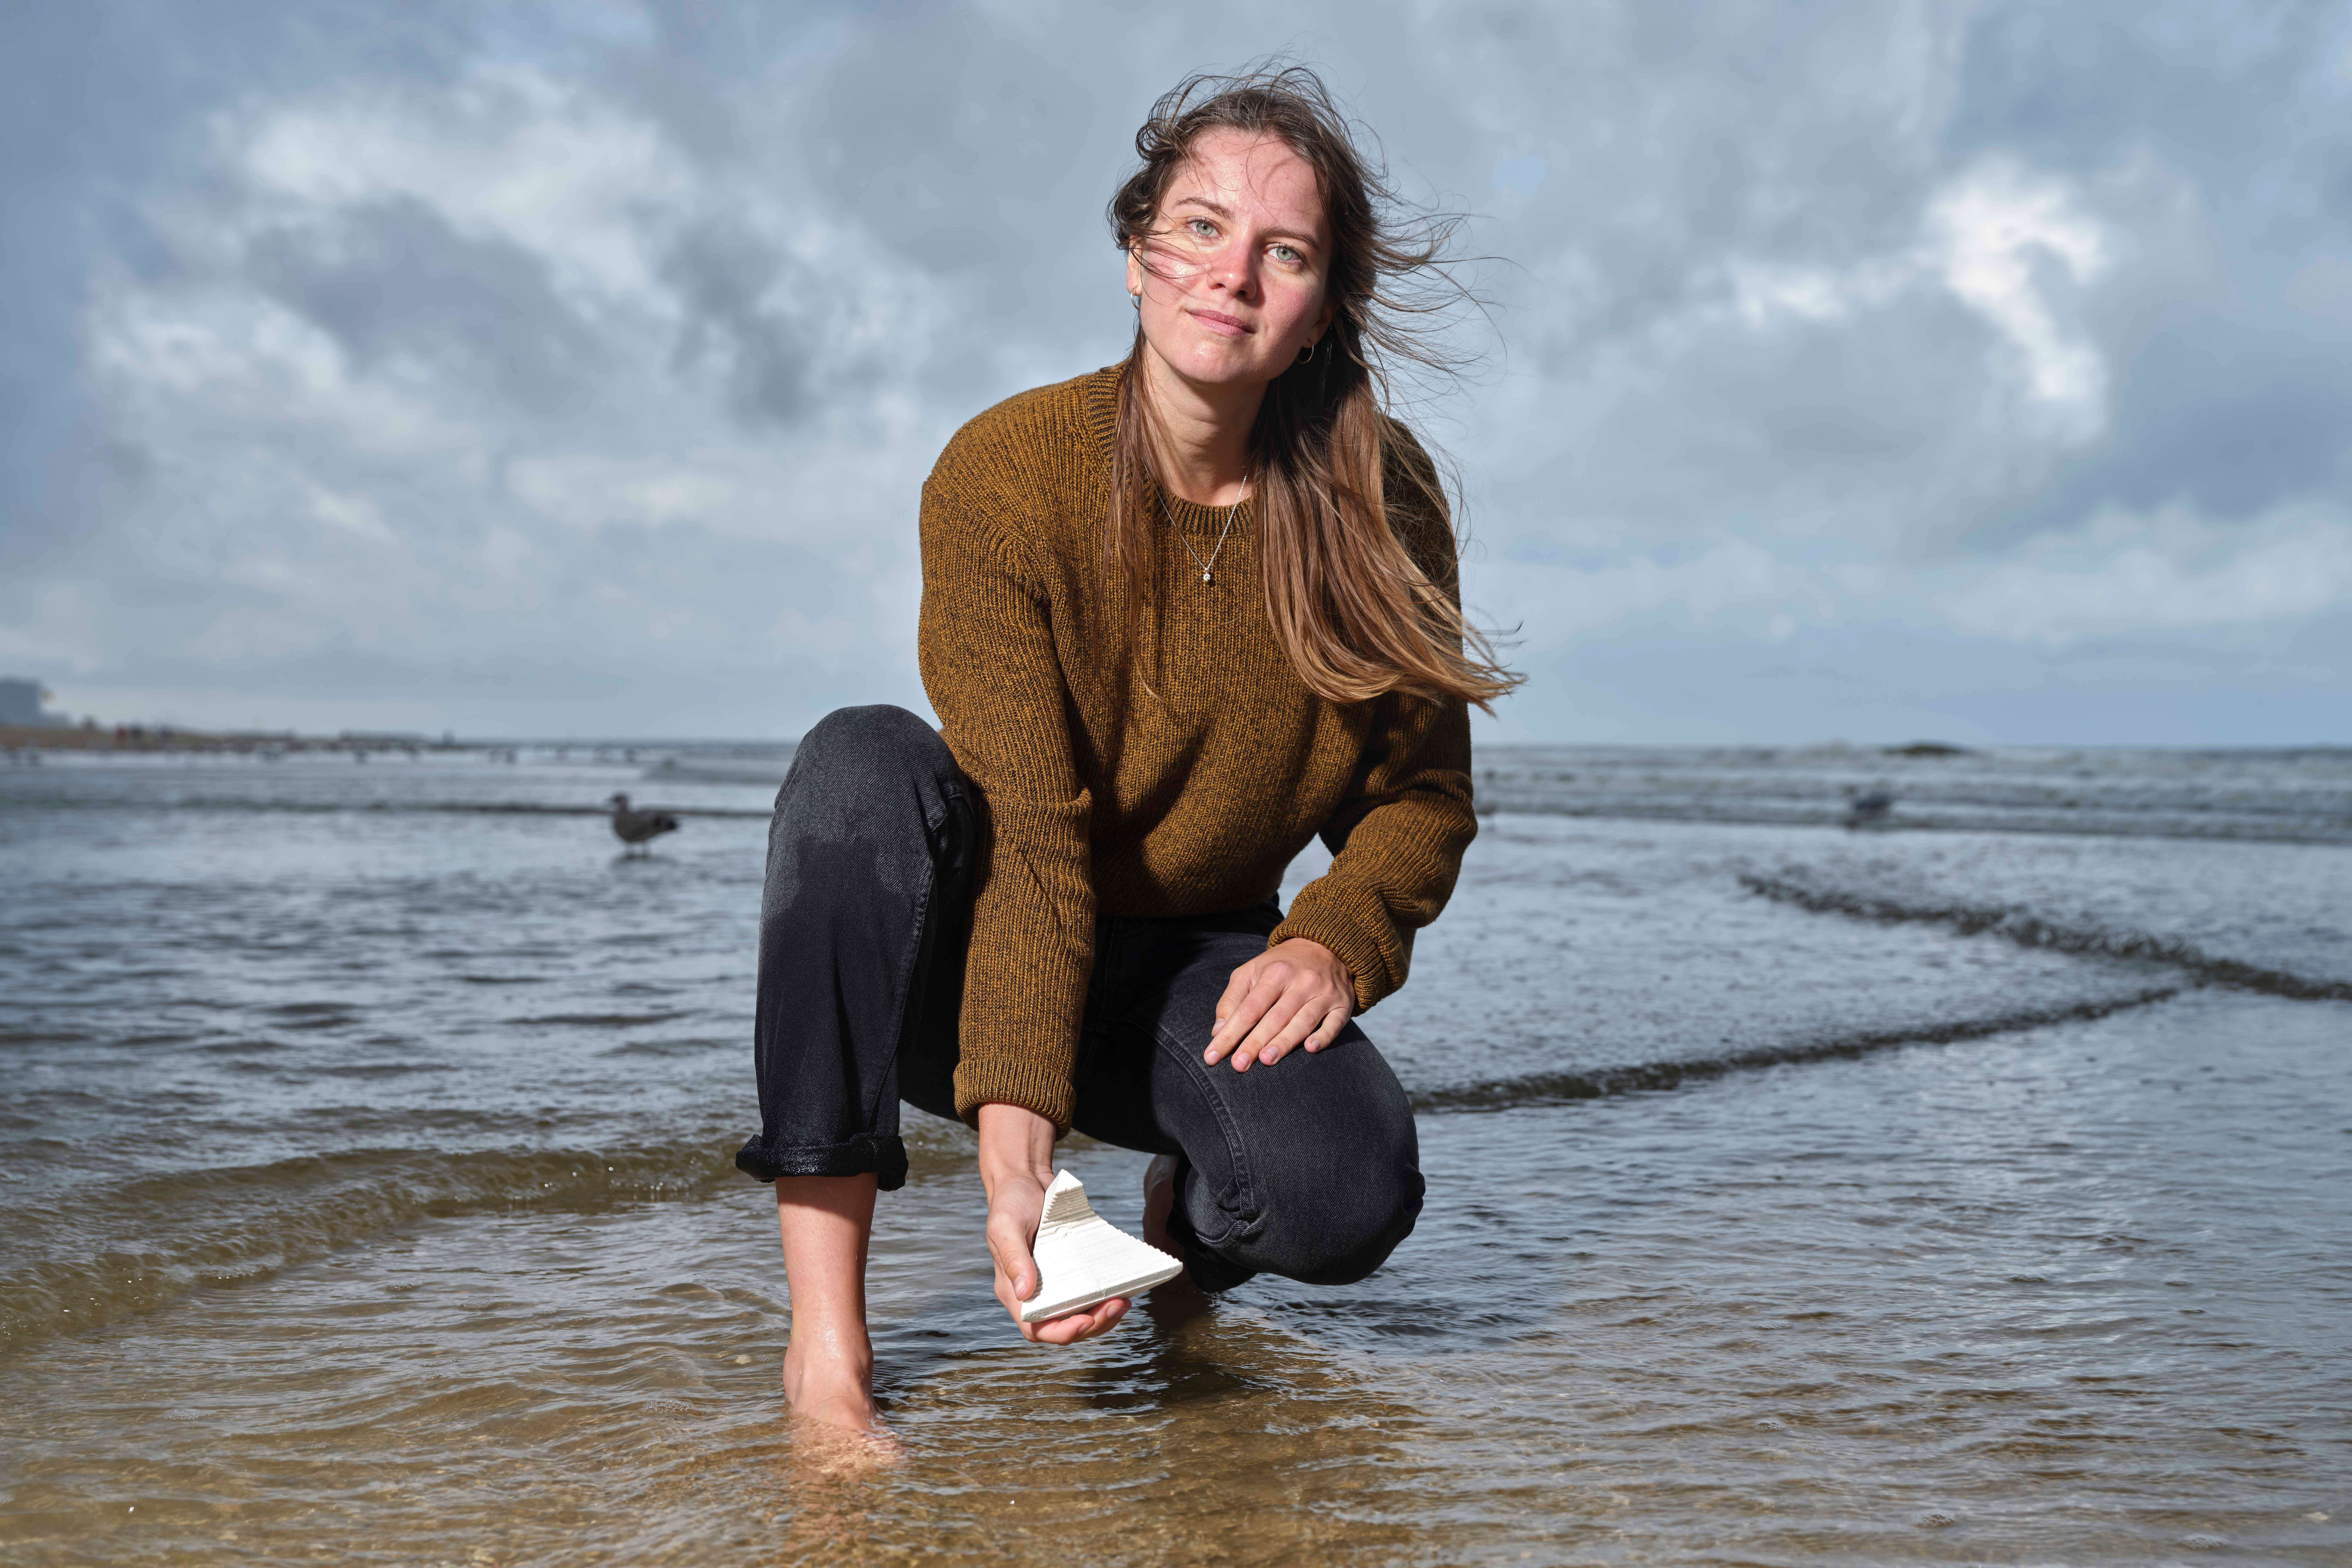 Anne Raspoort with reef tiles for North Sea (Photography by Frank Auperle)